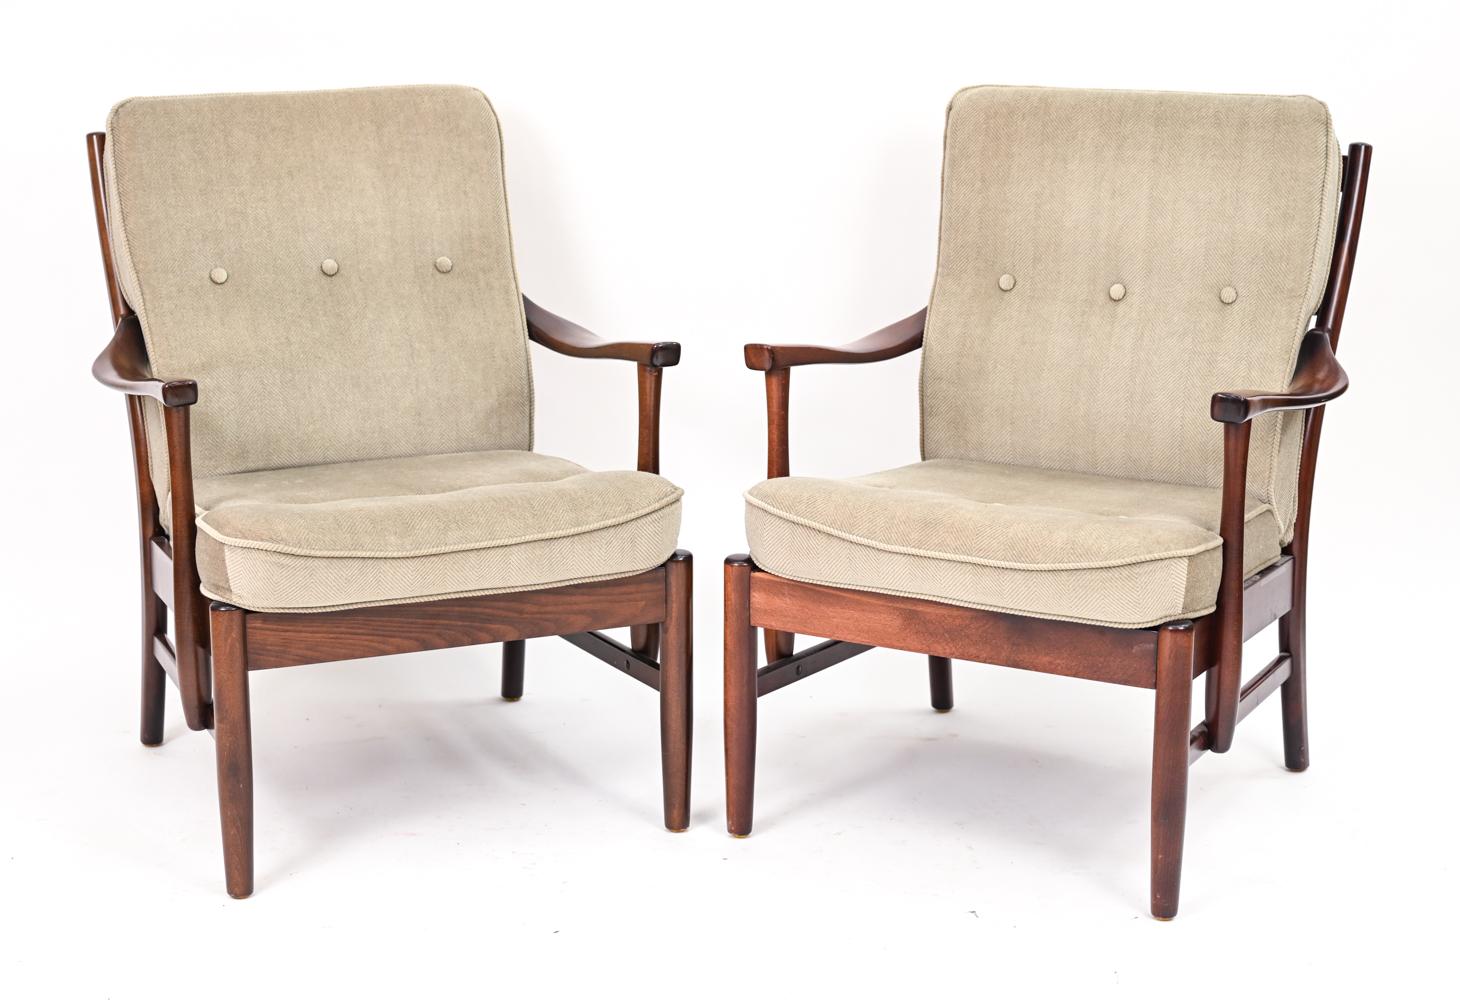 An elegant pair of Scandinavian modern fauteuil lounge chairs by Danish manufacturer Farstrup, boasting quality craftsmanship and design. These Casa easy chairs have sturdy sculptural frames in handsome stained beech wood with curvilinear open